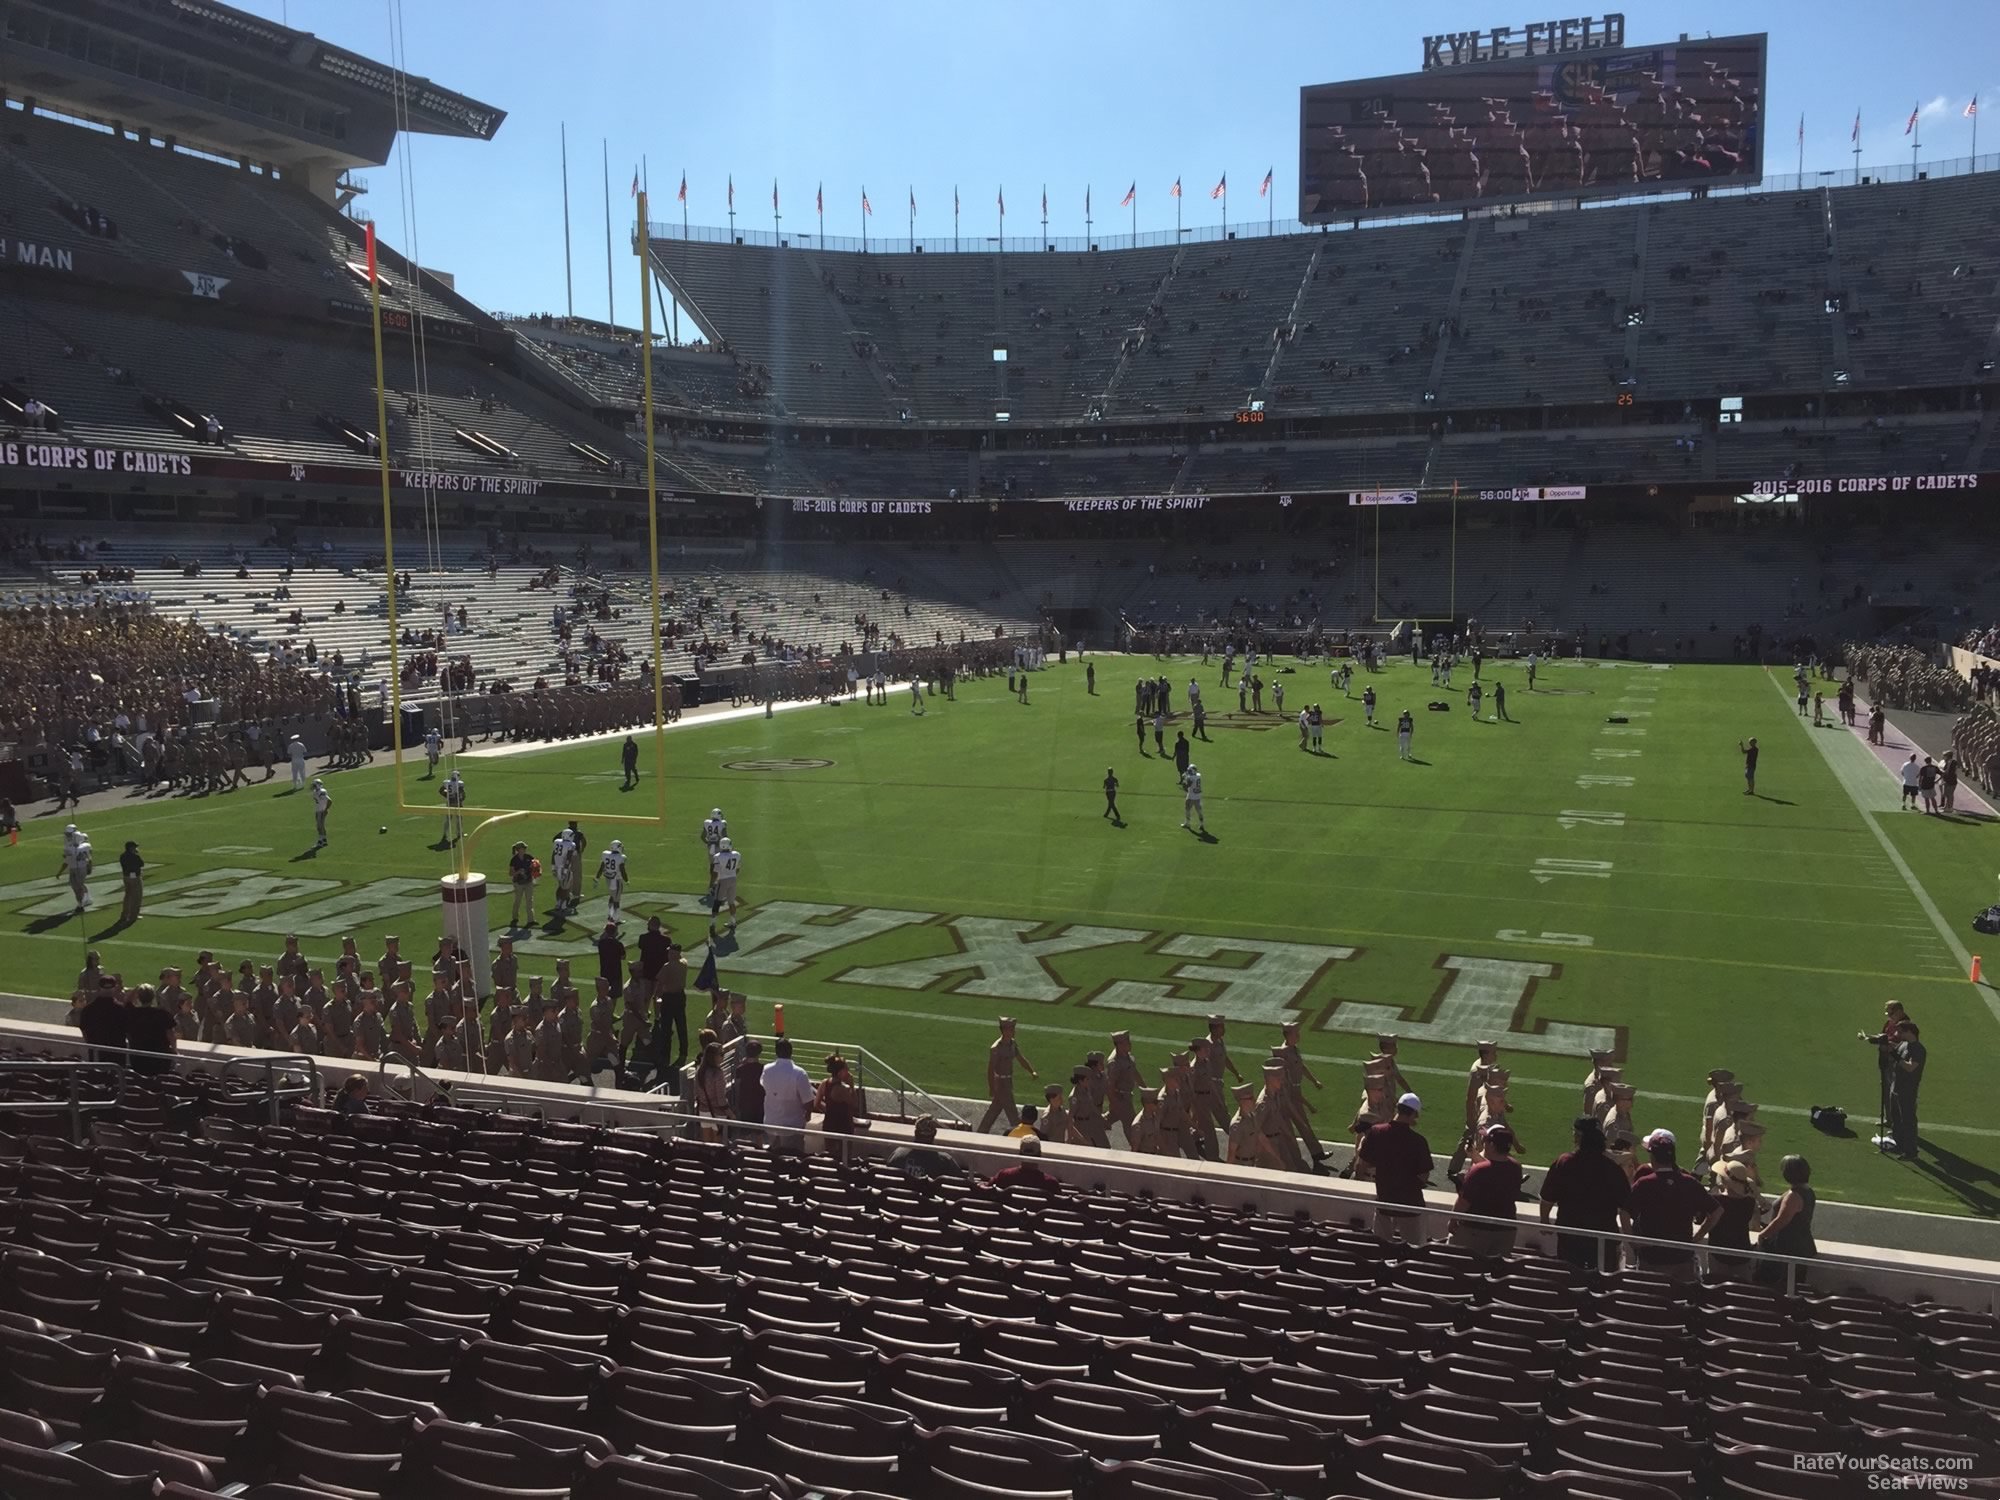 section 116, row 20 seat view  - kyle field